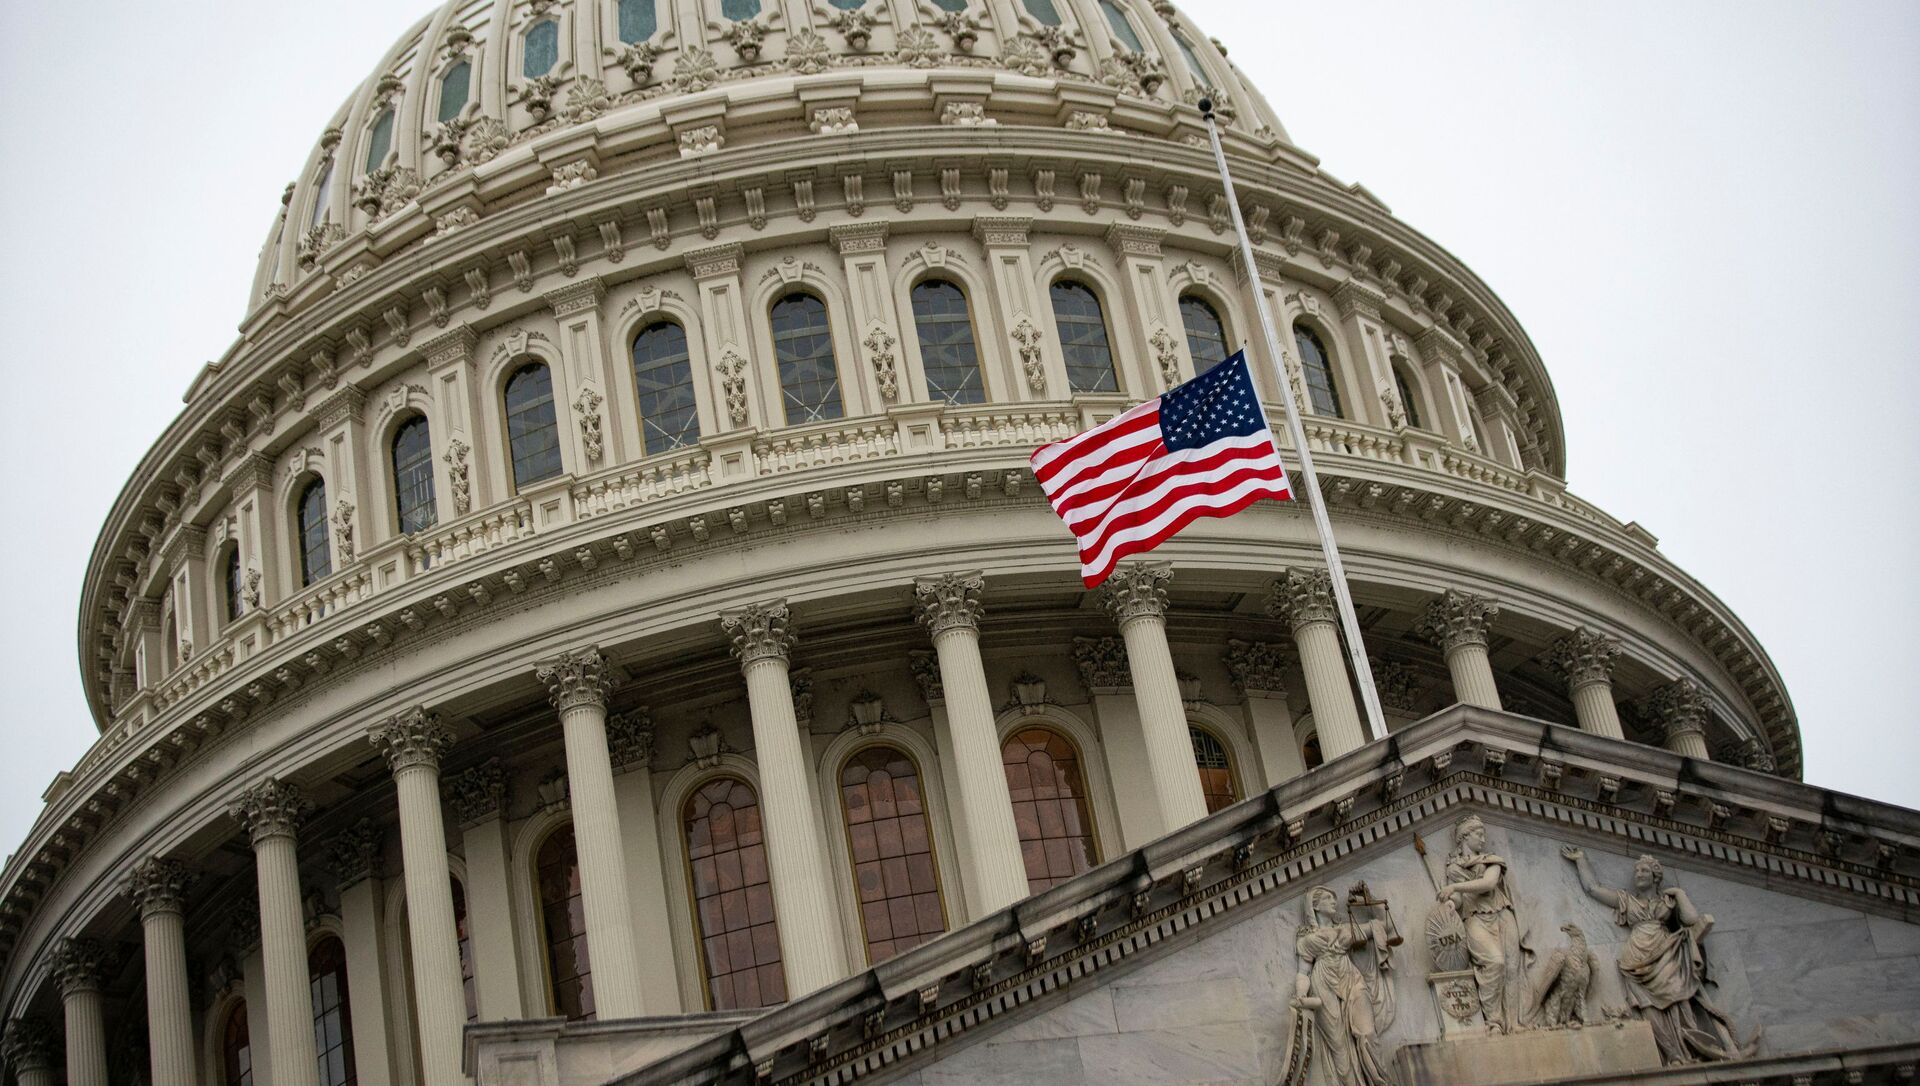 The American flag flies at half staff at the U.S. Capitol Building on the fifth day of the impeachment trial of former U.S. President Donald Trump, on charges of inciting the deadly attack on the U.S. Capitol, in Washington, U.S., February 13, 2021. - Sputnik International, 1920, 13.02.2021